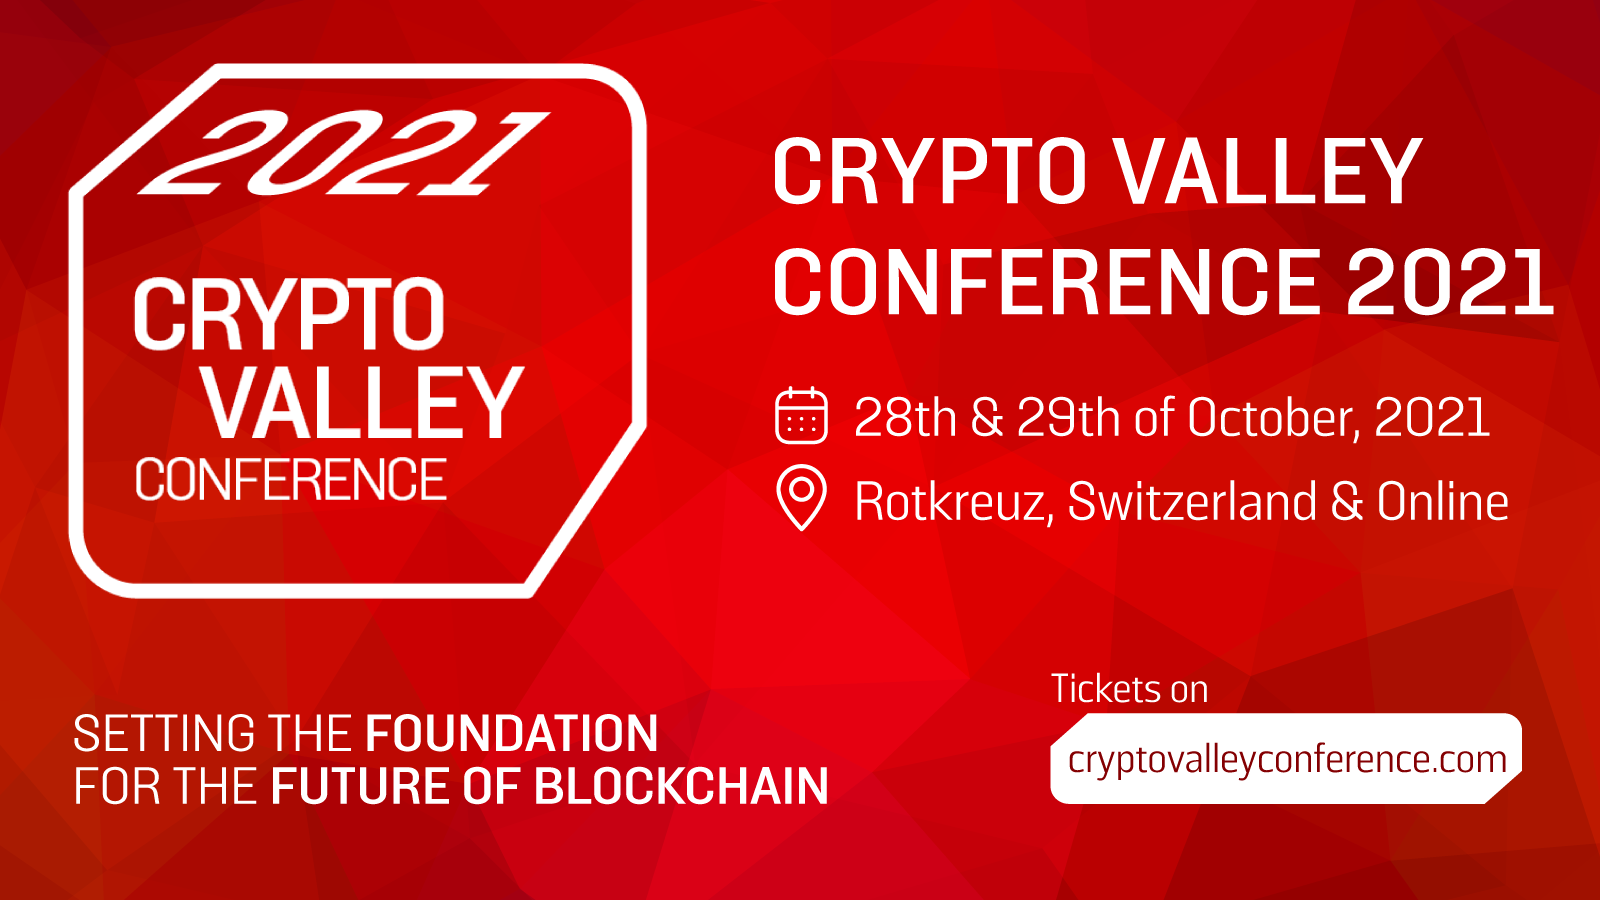 Crypto Valley Conference 2021